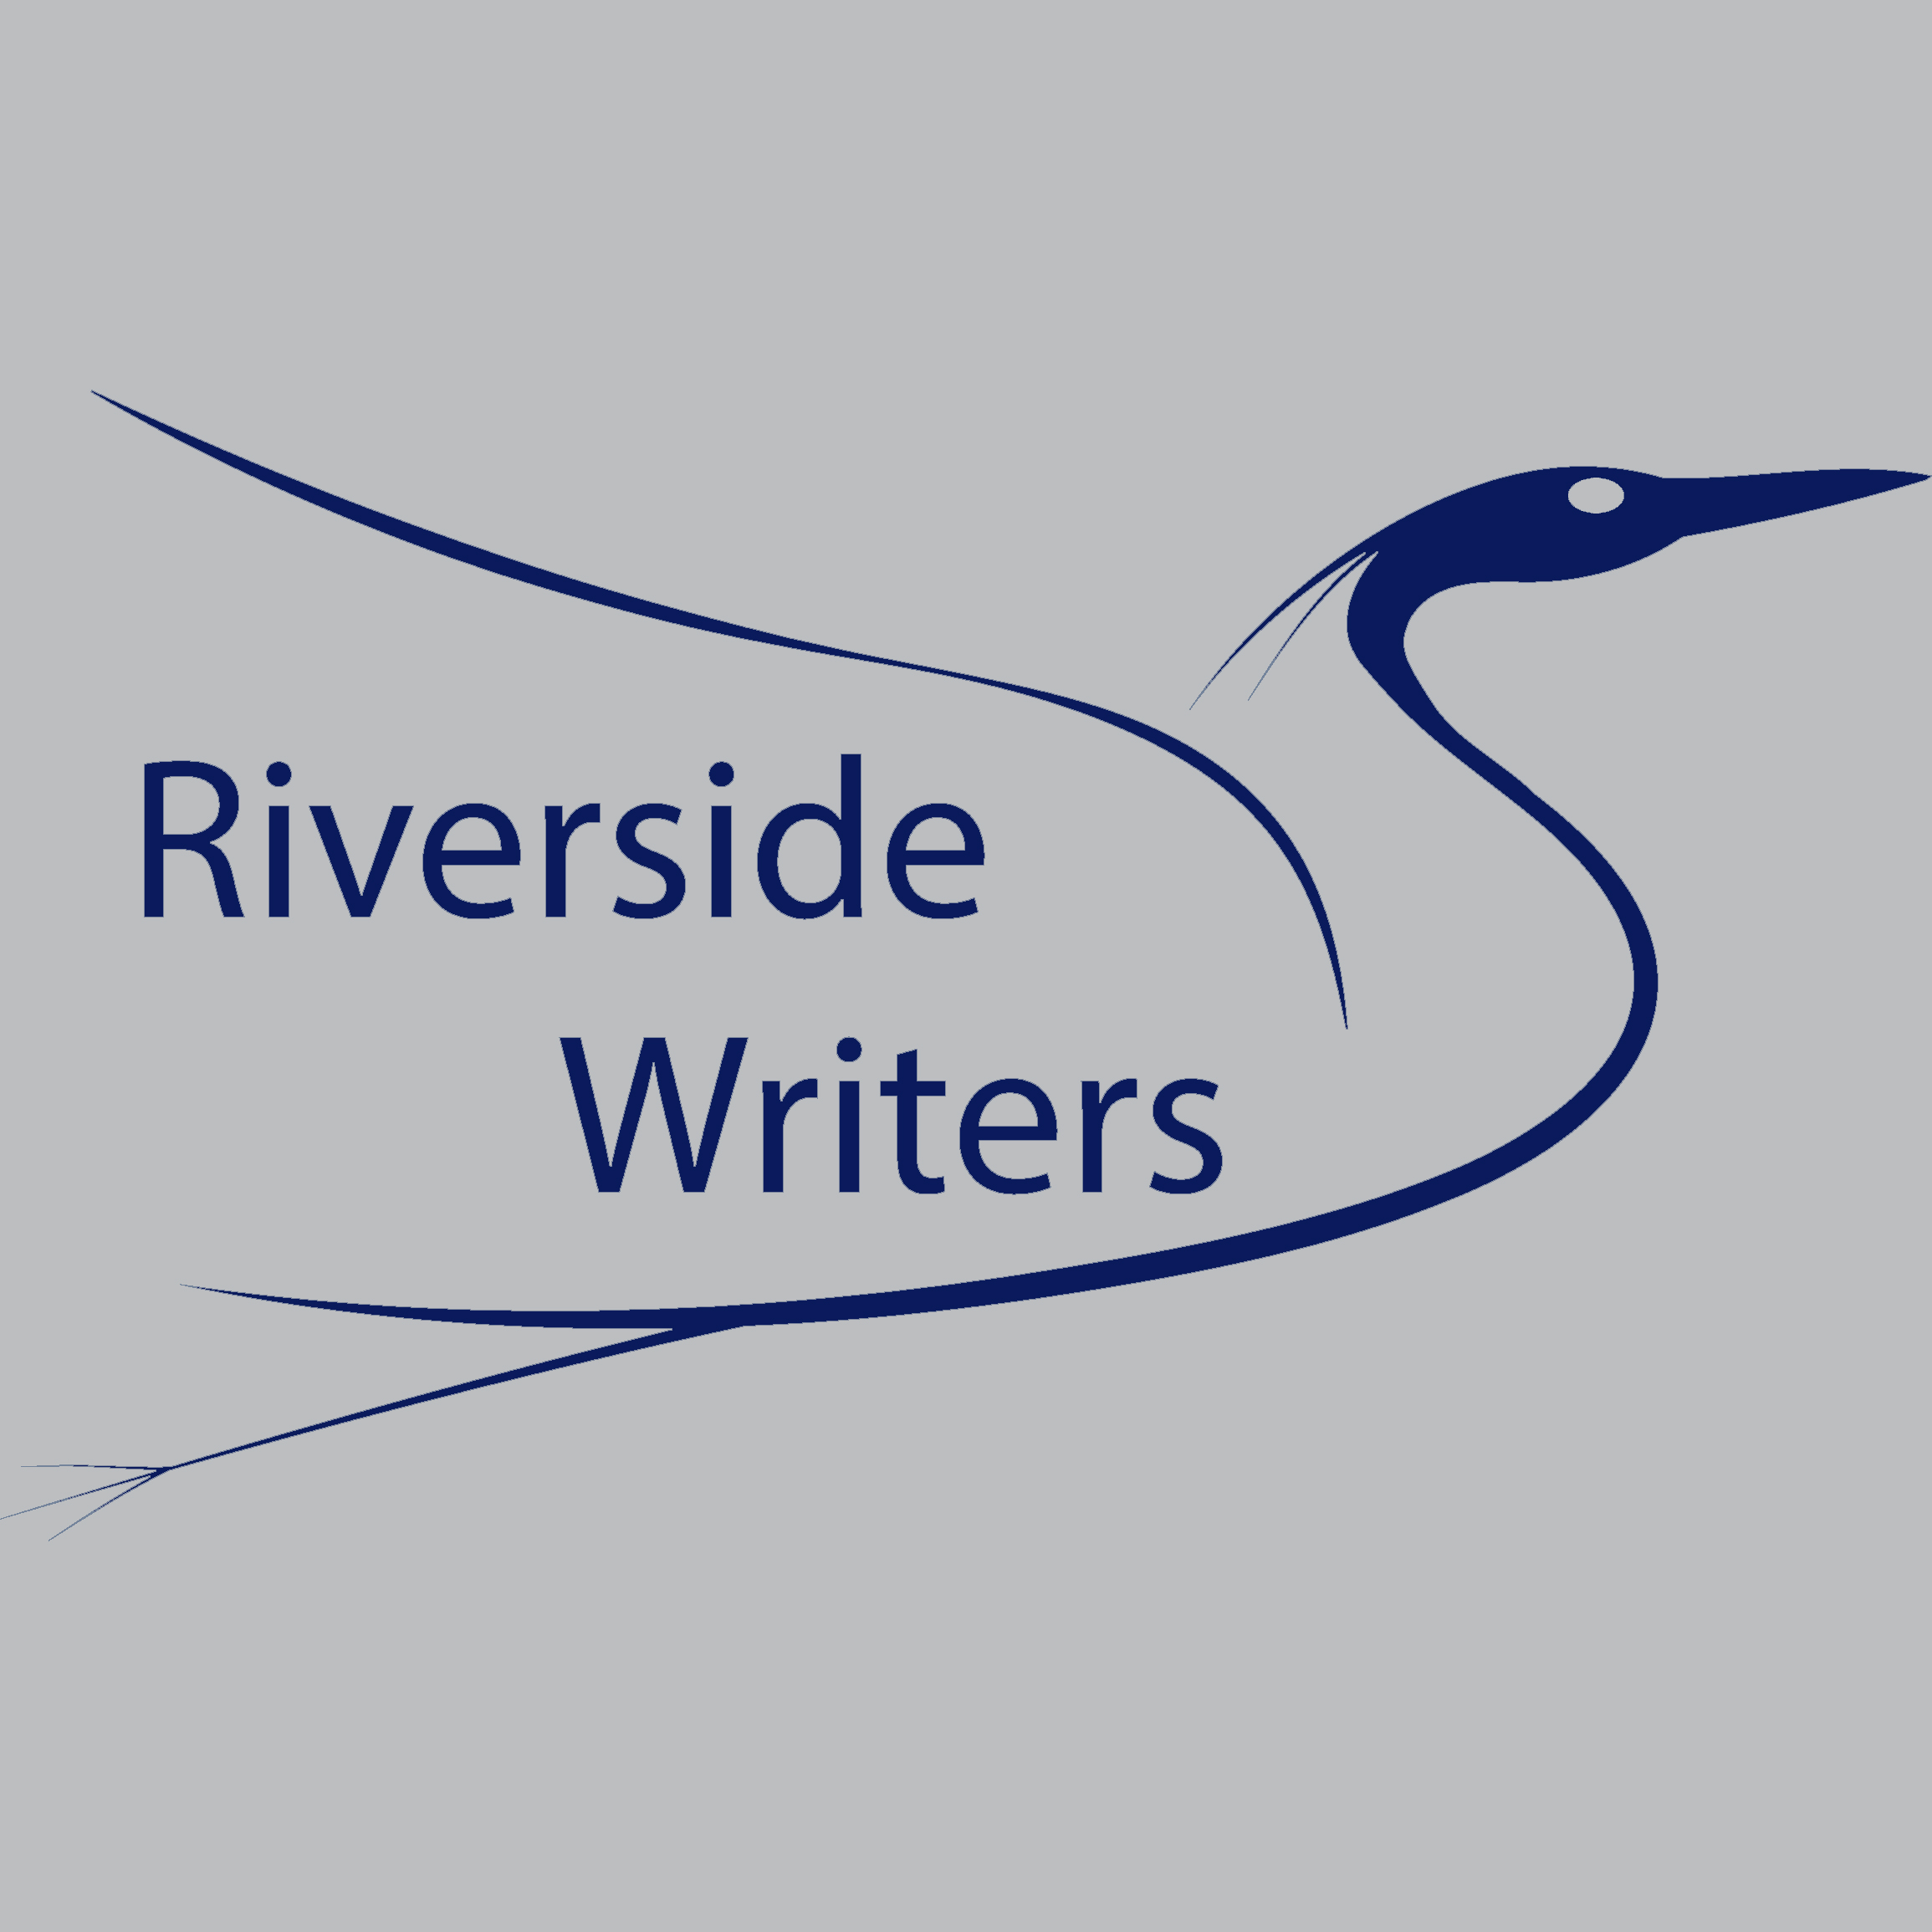 A logo with a stylized image of a heron and the name Riverside Writers